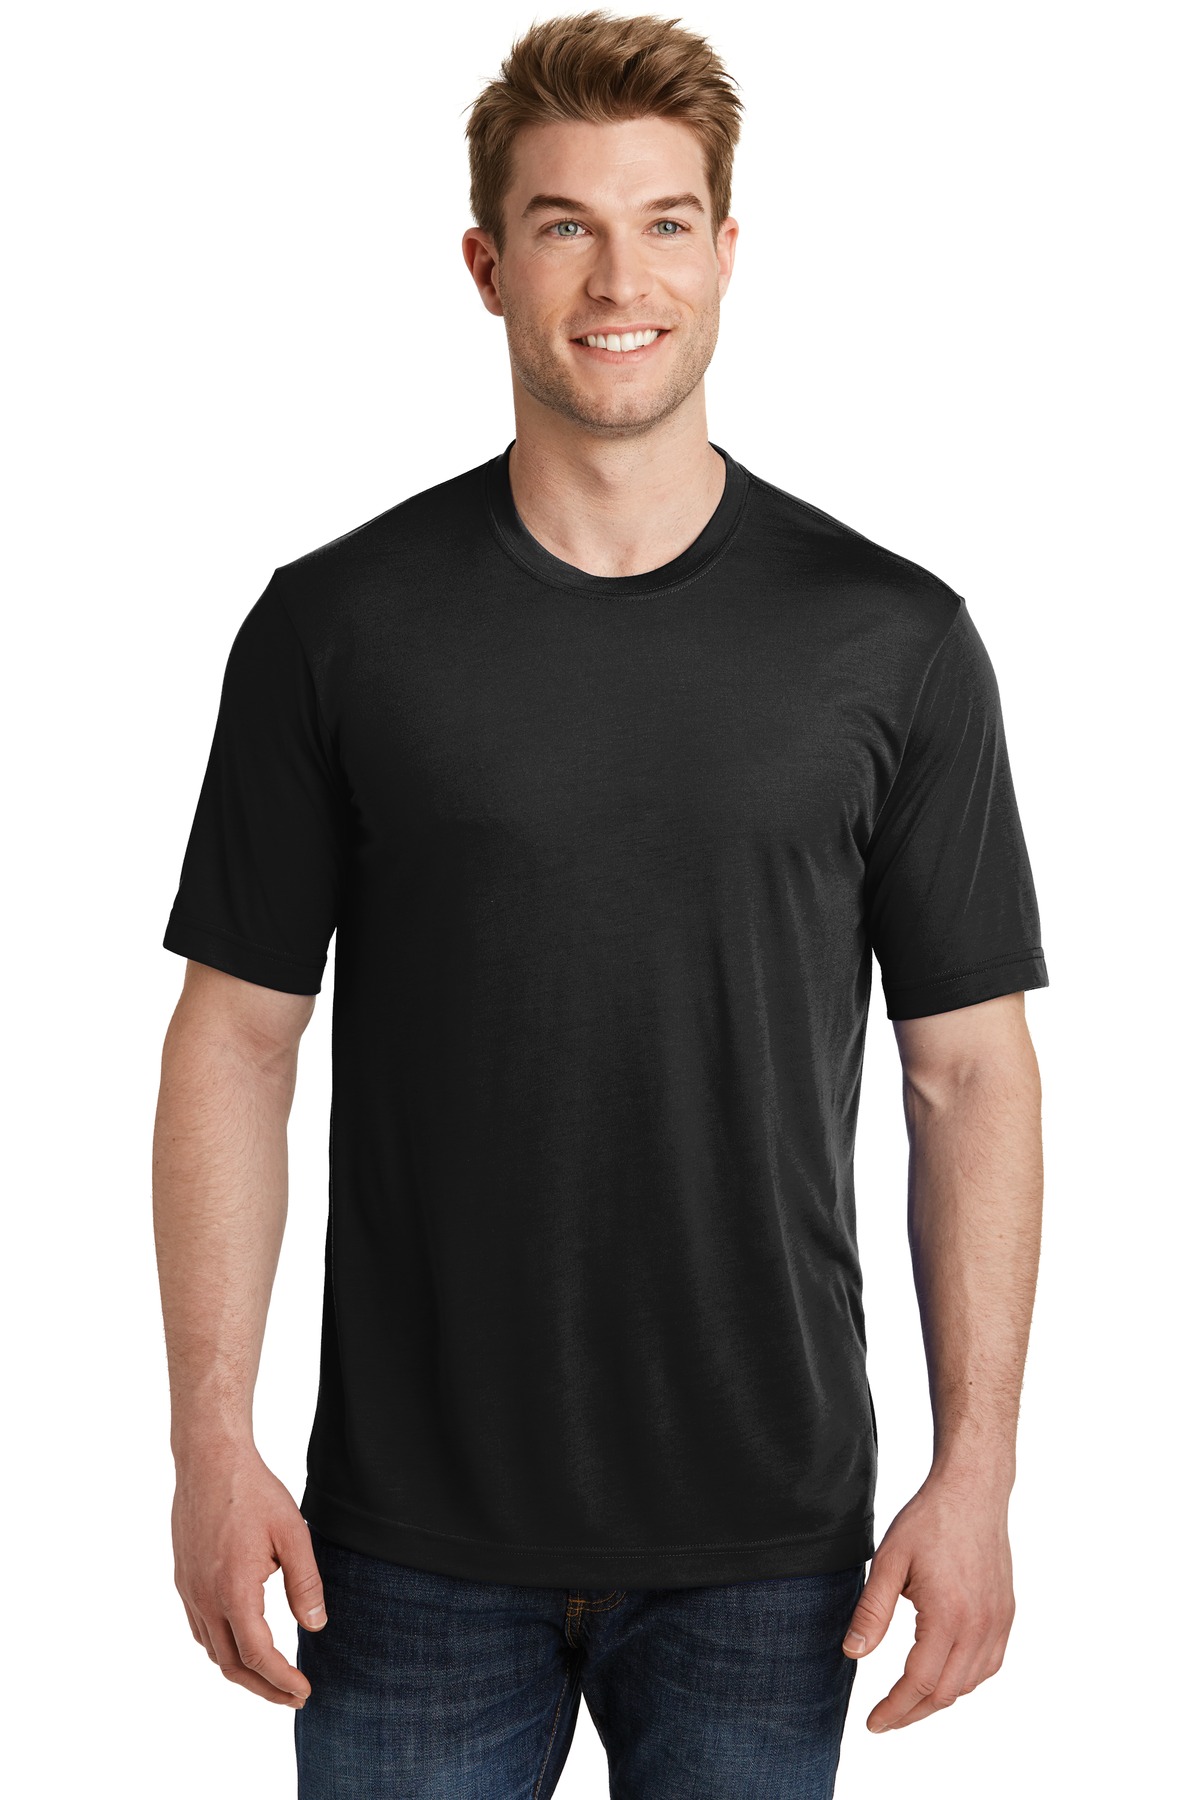 Sport-Tek Hospitality T-Shirts ® PosiCharge® Competitor Cotton Touch Tee.-Sport-Tek